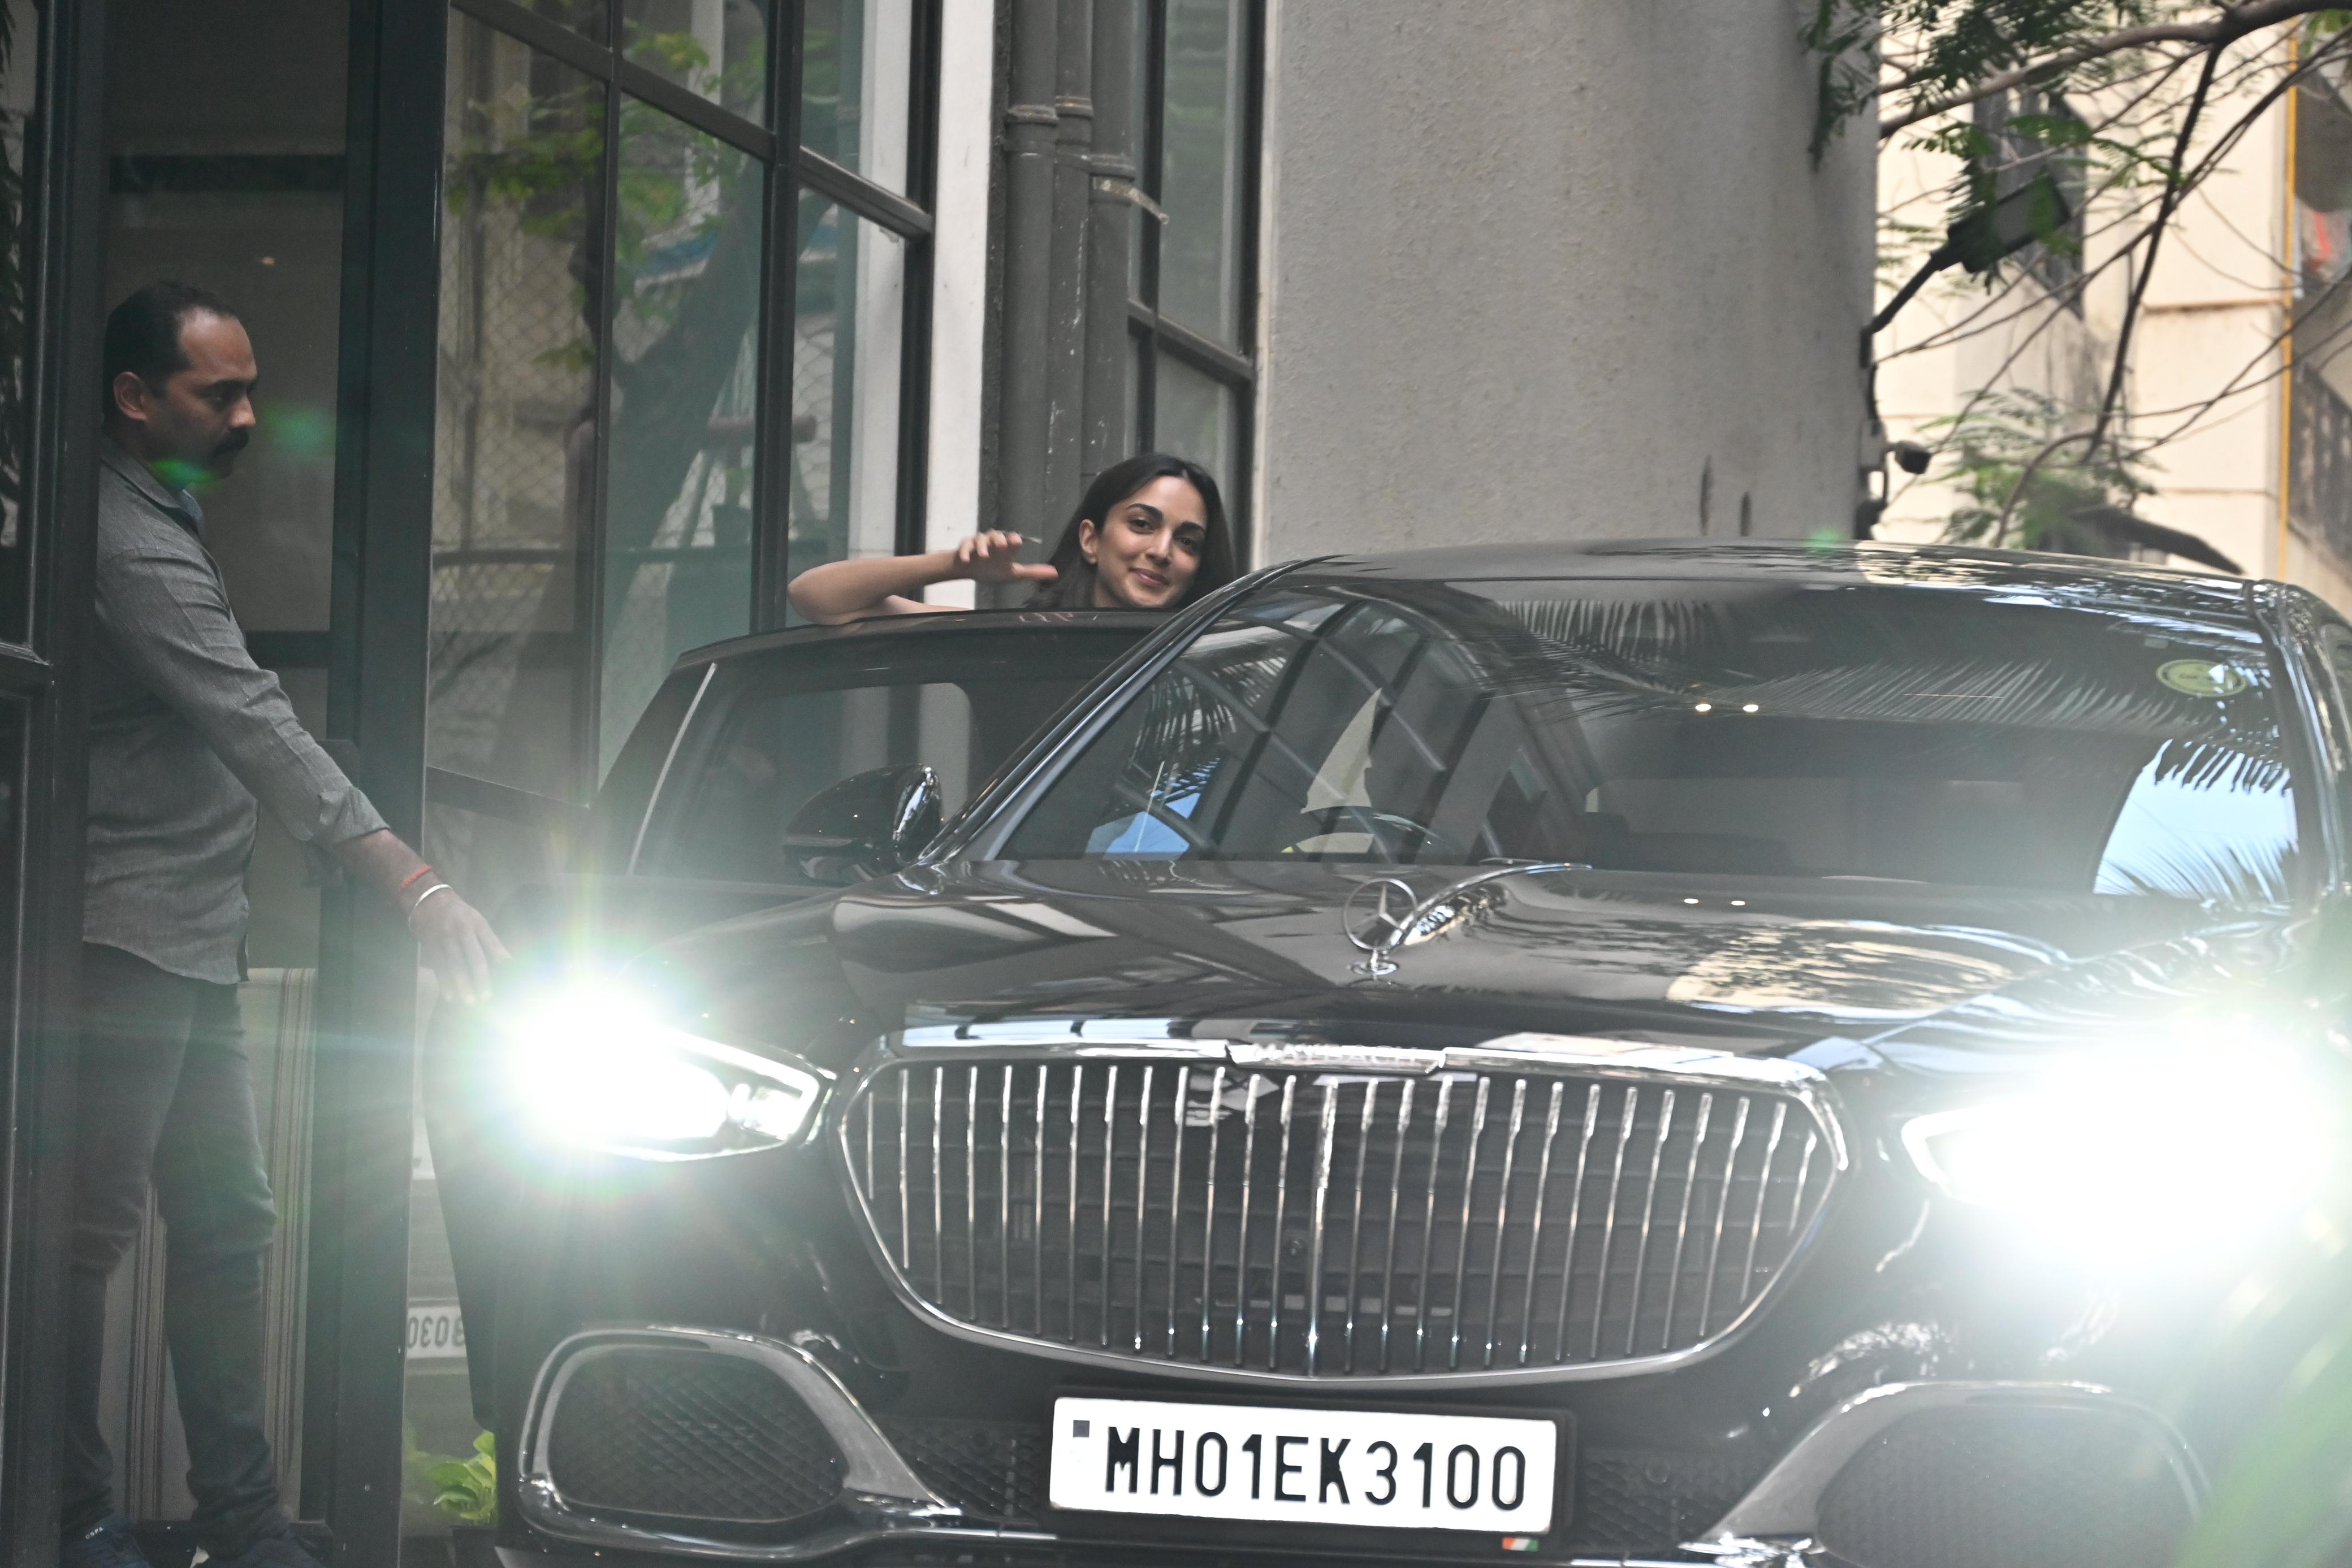 The actress looked gorgeous as she waved for the paparazzi. Does she have something on the horizon?